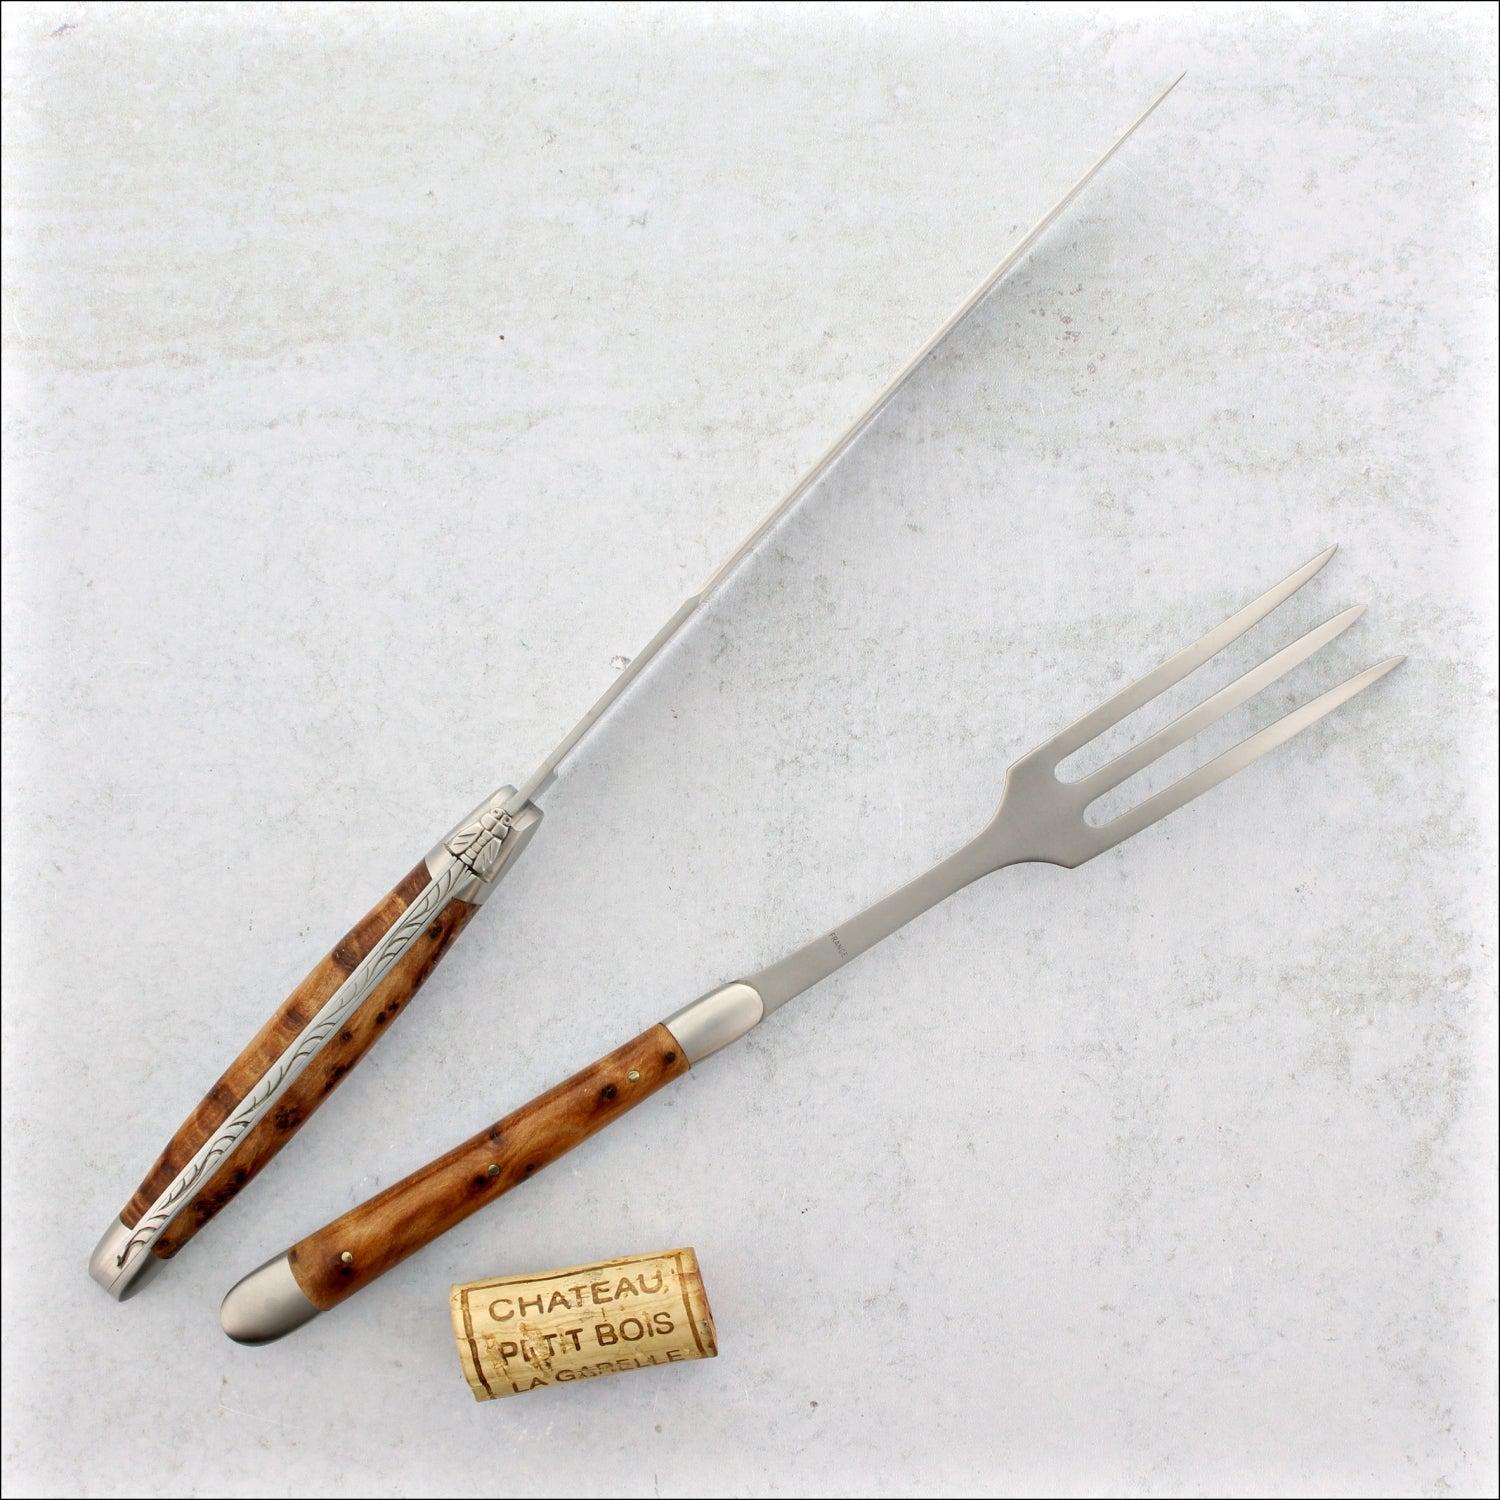 Set of 2 Laguiole Table Knives and 2 Forks Thuya wood